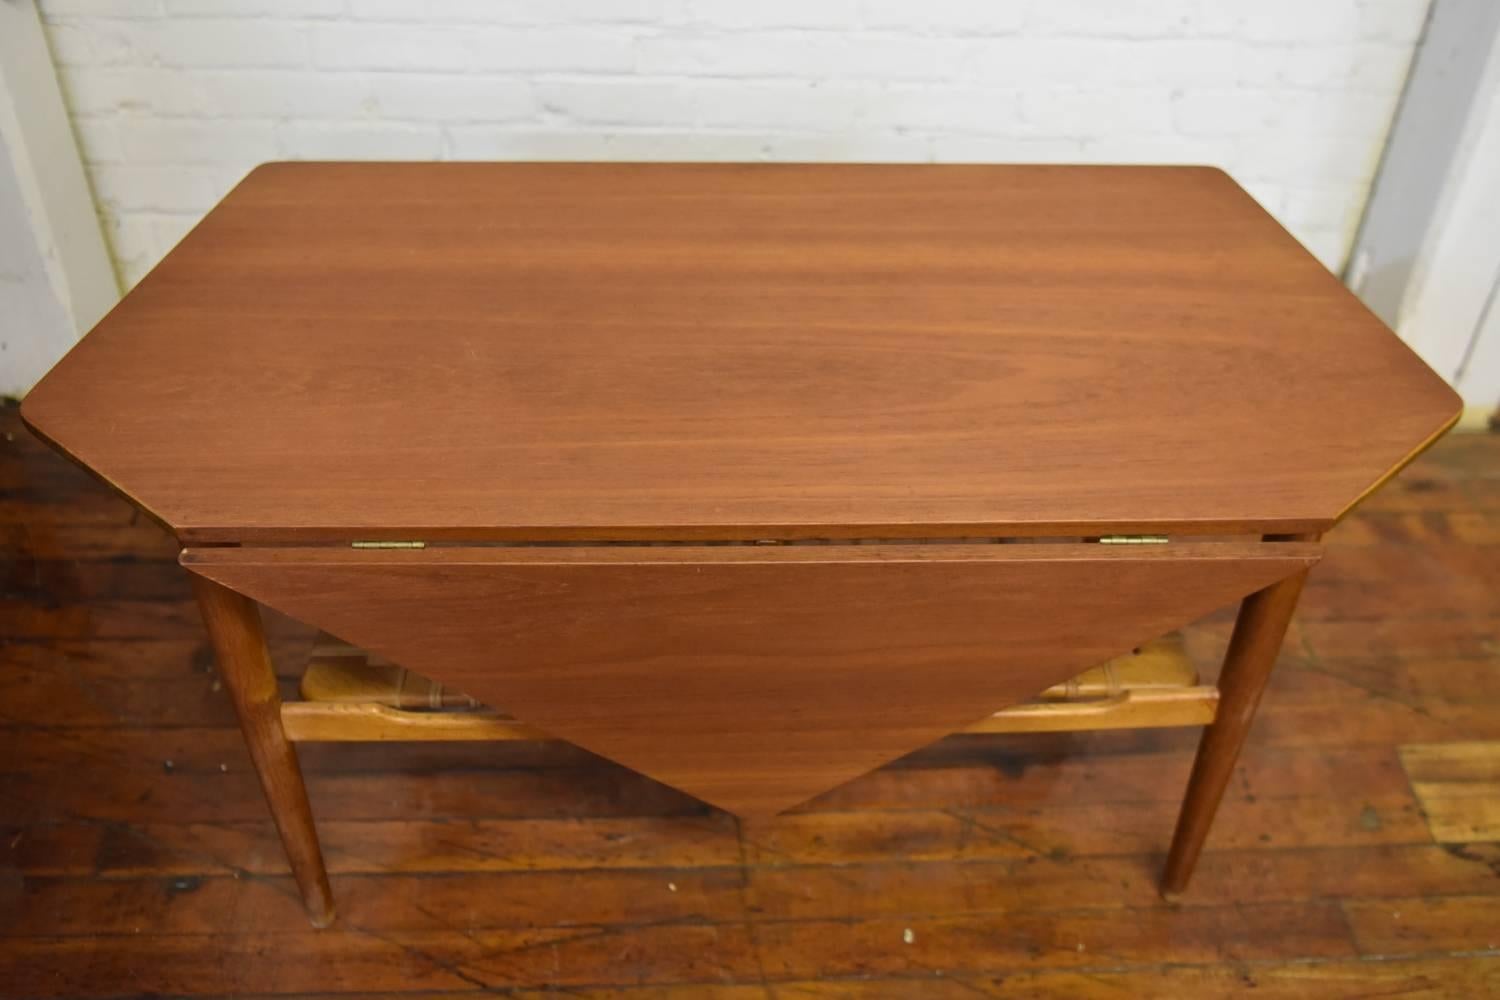 This beautiful teak coffee table is perfect for apartment living. With a drop leaf to add a little extra space during evenings of entertainment and a magazine rack underneath, this table works as storage and fills its purpose of a cocktail/coffee